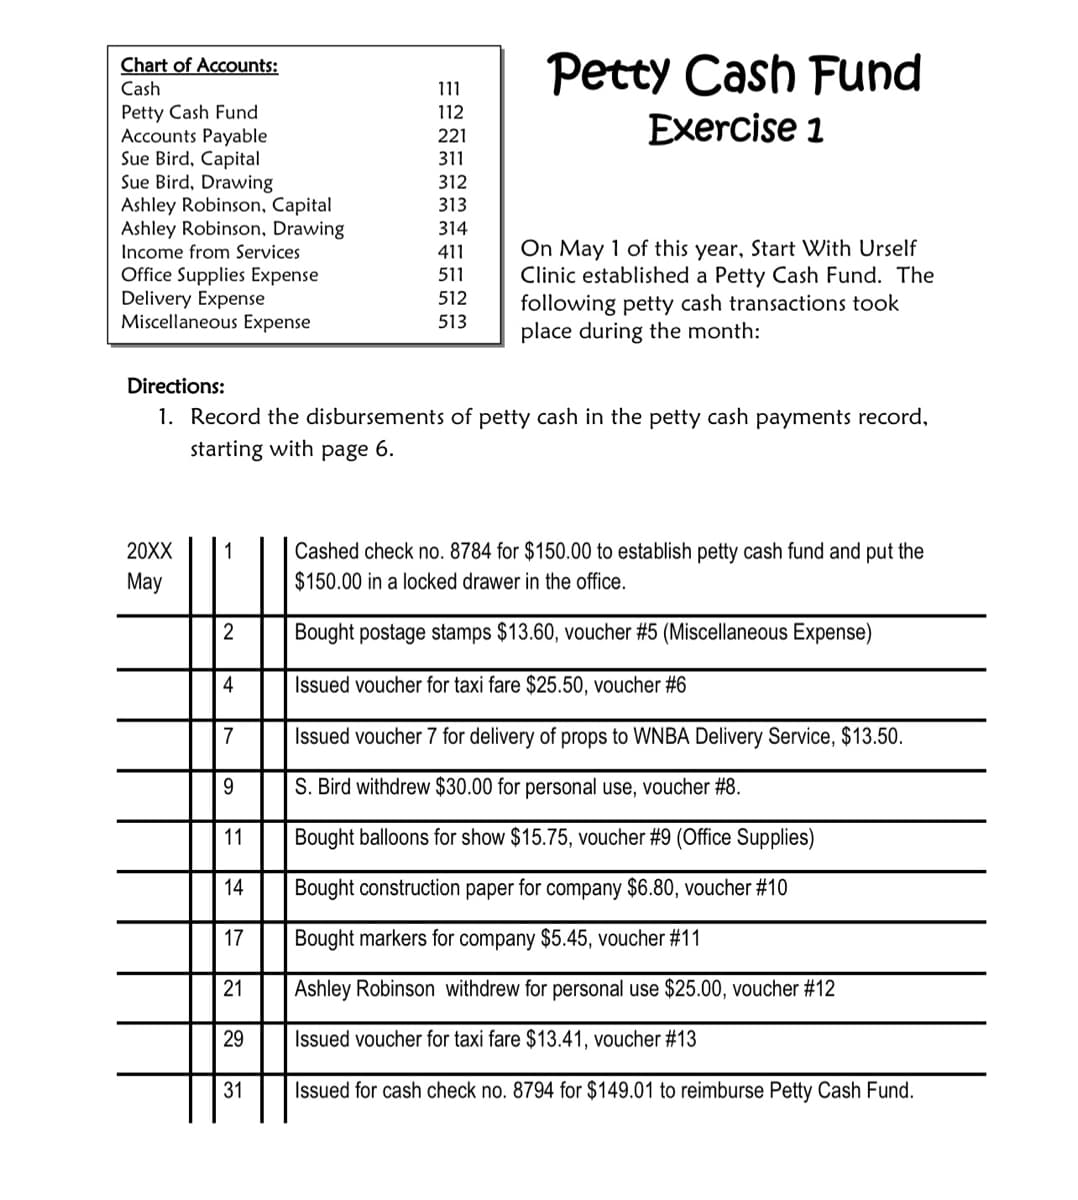 Petty Cash Fund
Chart of Accounts:
Cash
11
Petty Cash Fund
Accounts Payable
Sue Bird, Capital
Sue Bird, Drawing
Ashley Robinson, Capital
Ashley Robinson, Drawing
Income from Services
112
Exercise 1
221
311
312
313
314
On May 1 of this year, Start With Urself
Clinic established a Petty Cash Fund. The
following petty cash transactions took
place during the month:
411
Office Supplies Expense
Delivery Expense
Miscellaneous Expense
511
512
513
Directions:
1. Record the disbursements of petty cash in the petty cash payments record,
starting with page 6.
Cashed check no. 8784 for $150.00 to establish petty cash fund and put the
$150.00 in a locked drawer in the office.
20XX
1
May
Bought postage stamps $13.60, voucher #5 (Miscellaneous Expense)
4
Issued voucher for taxi fare $25.50, voucher #6
Issued voucher 7 for delivery of props to WNBA Delivery Service, $13.50.
9.
S. Bird withdrew $30.00 for personal use, voucher #8.
11
Bought balloons for show $15.75, voucher #9 (Office Supplies)
14
Bought construction paper for company $6.80, voucher # 10
17
Bought markers for company $5.45, voucher #11
21
Ashley Robinson withdrew for personal use $25.00, voucher #12
29
Issued voucher for taxi fare $13.41, voucher #13
31
Issued for cash check no. 8794 for $149.01 to reimburse Petty Cash Fund.
